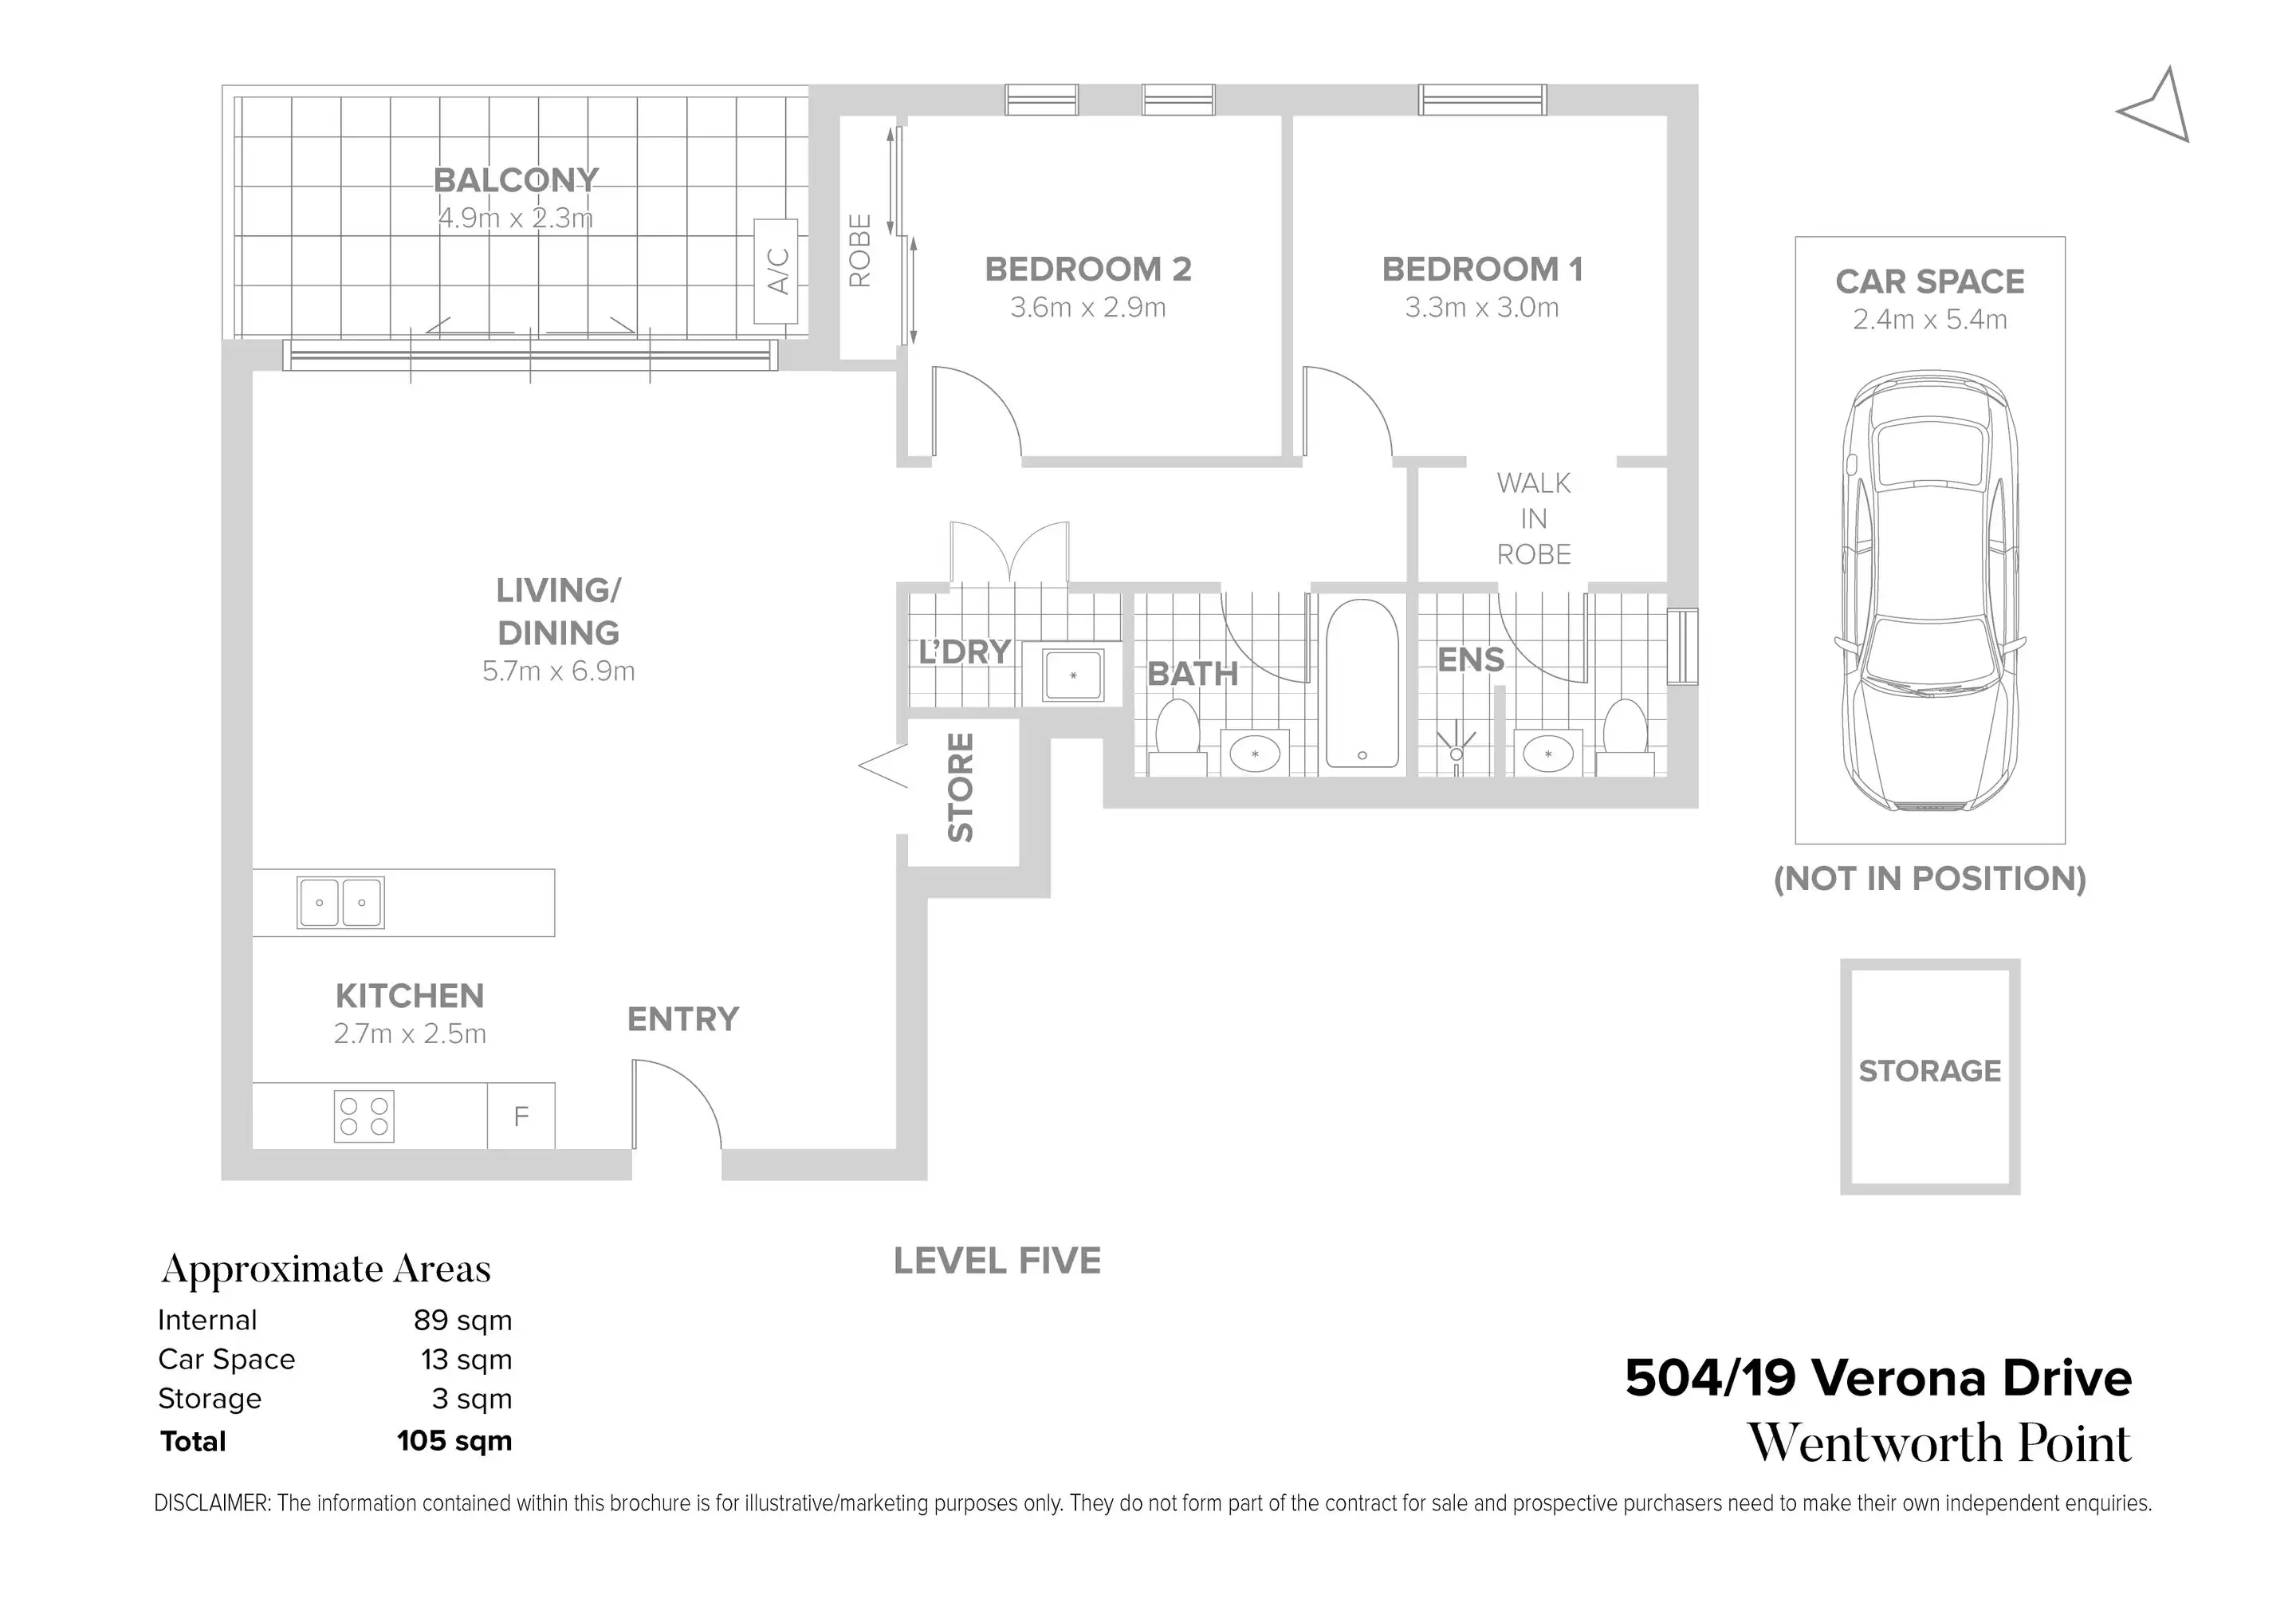 504/19 Verona Drive, Wentworth Point Sold by Chidiac Realty - floorplan